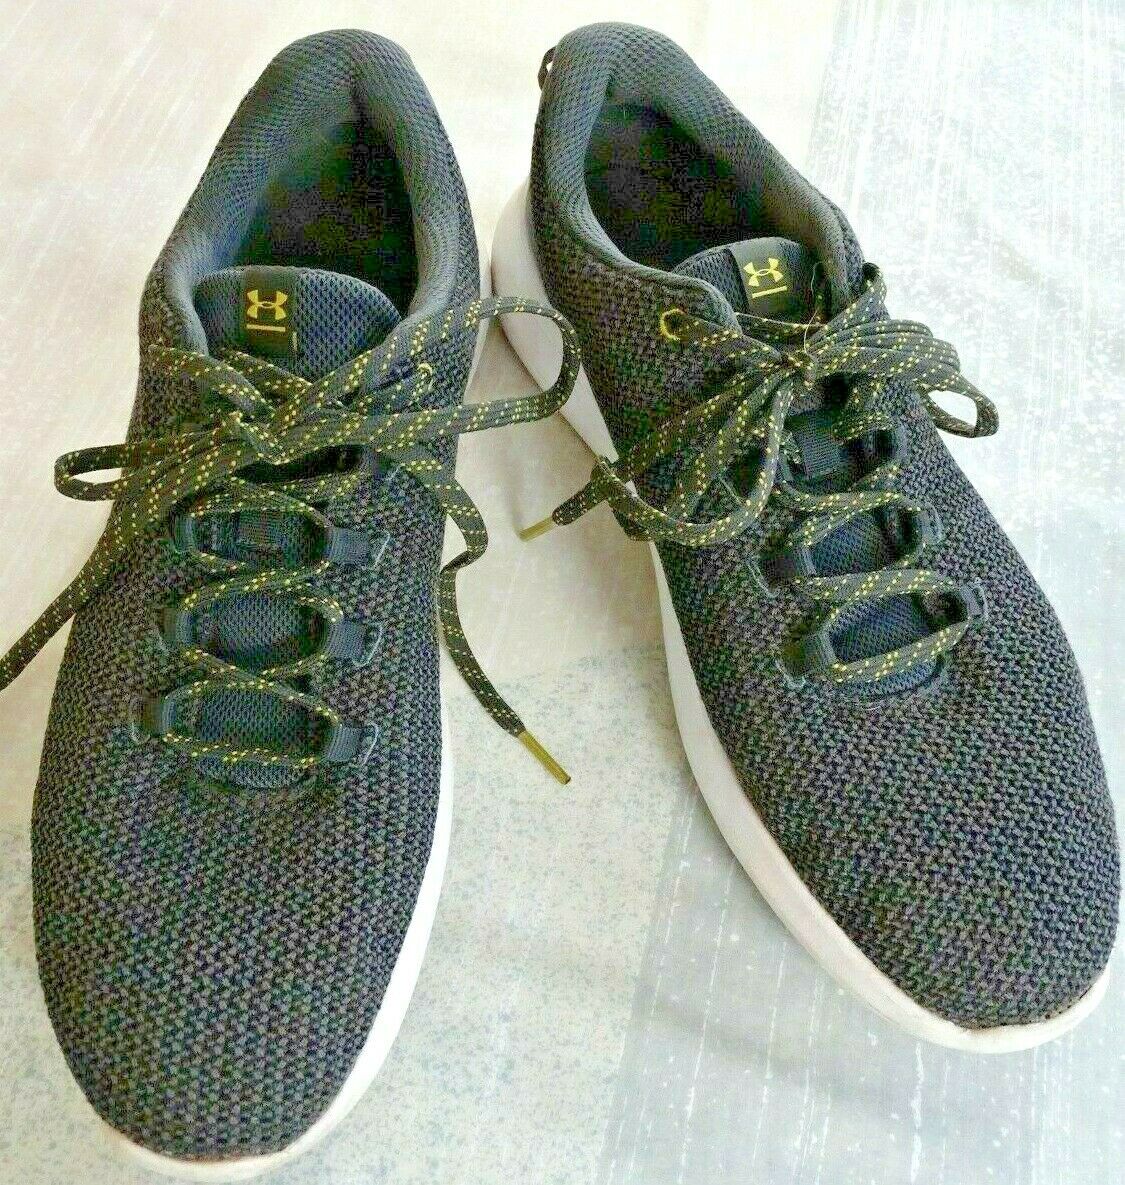 11.5 Under Armour Lace Up Nylon Mesh Walking Shoes,Charcoal Gray w/White Soles